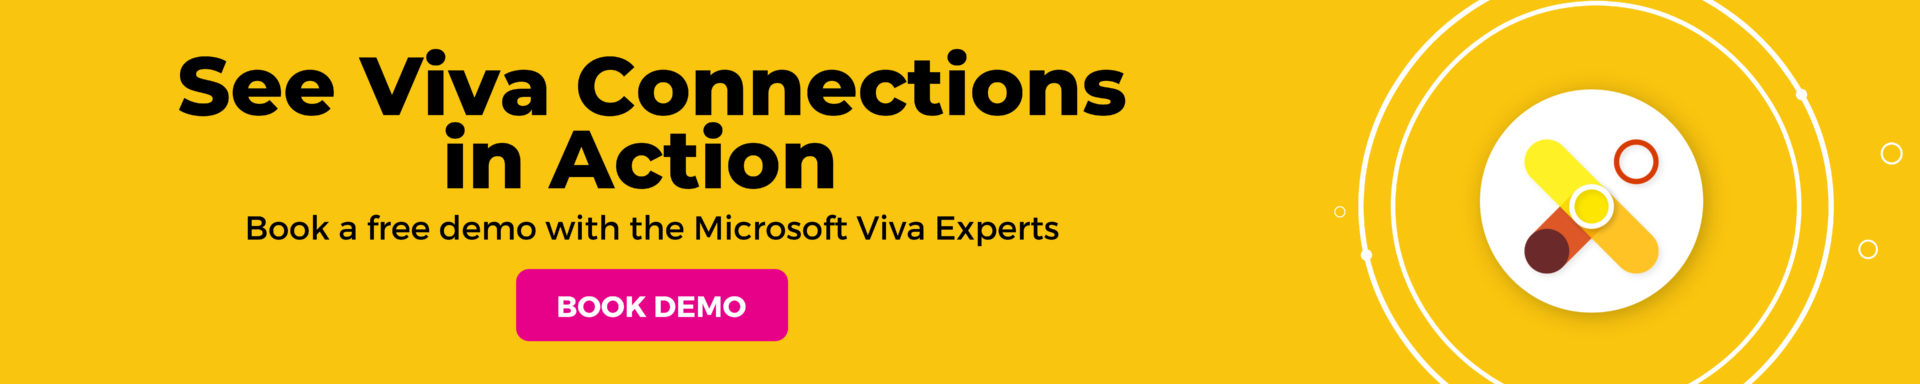 Viva Connections in action